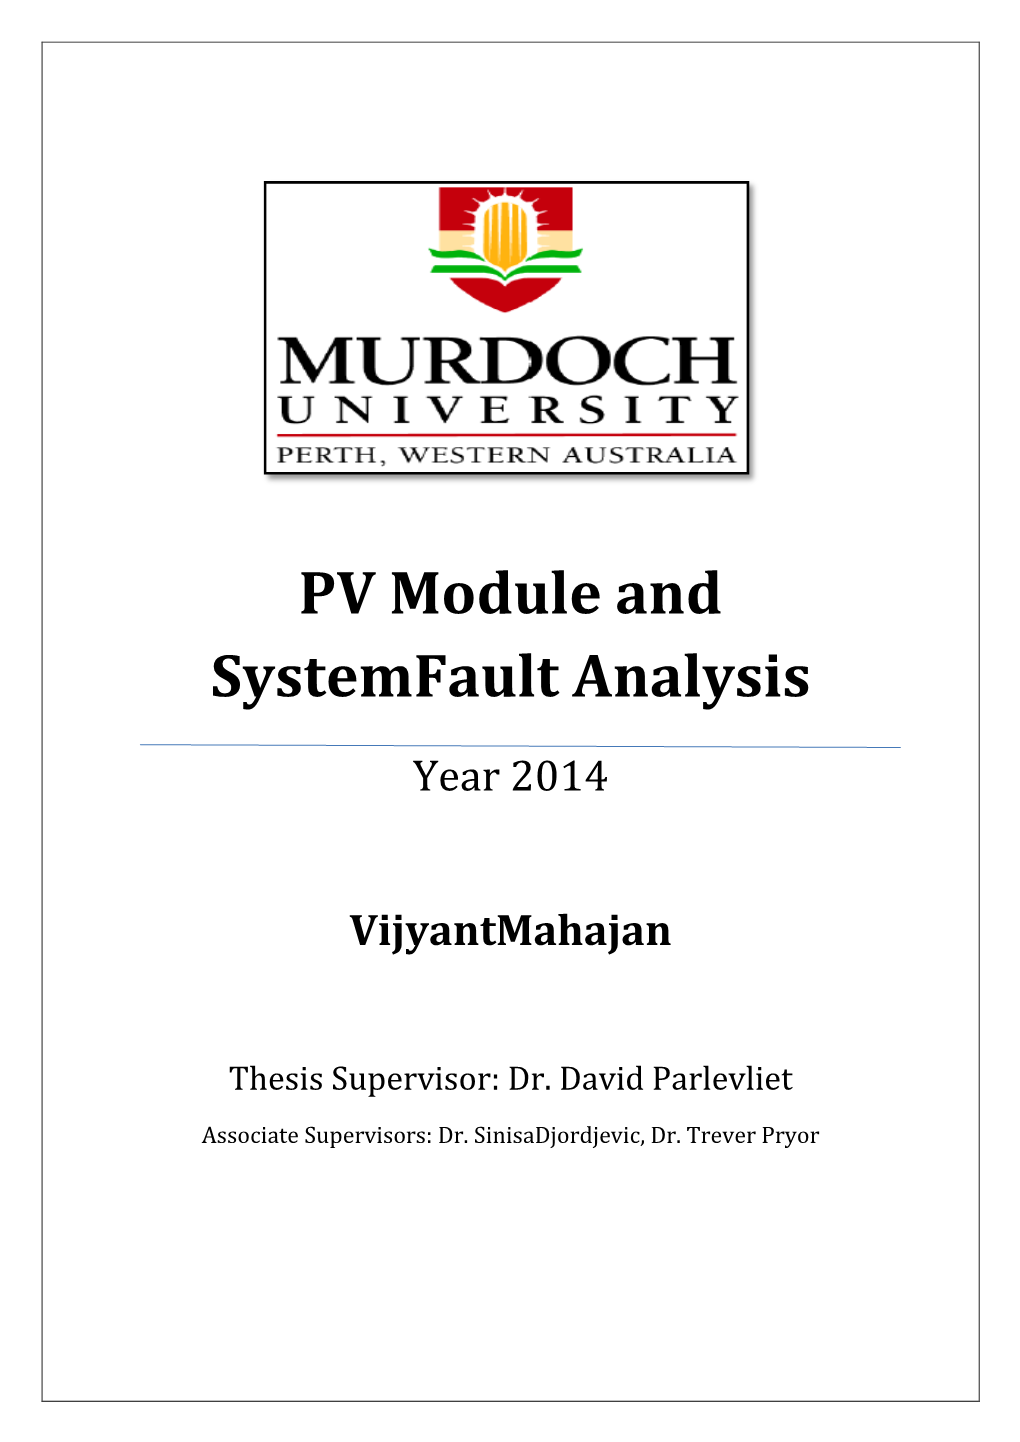 PV Module and System Fault Analysis